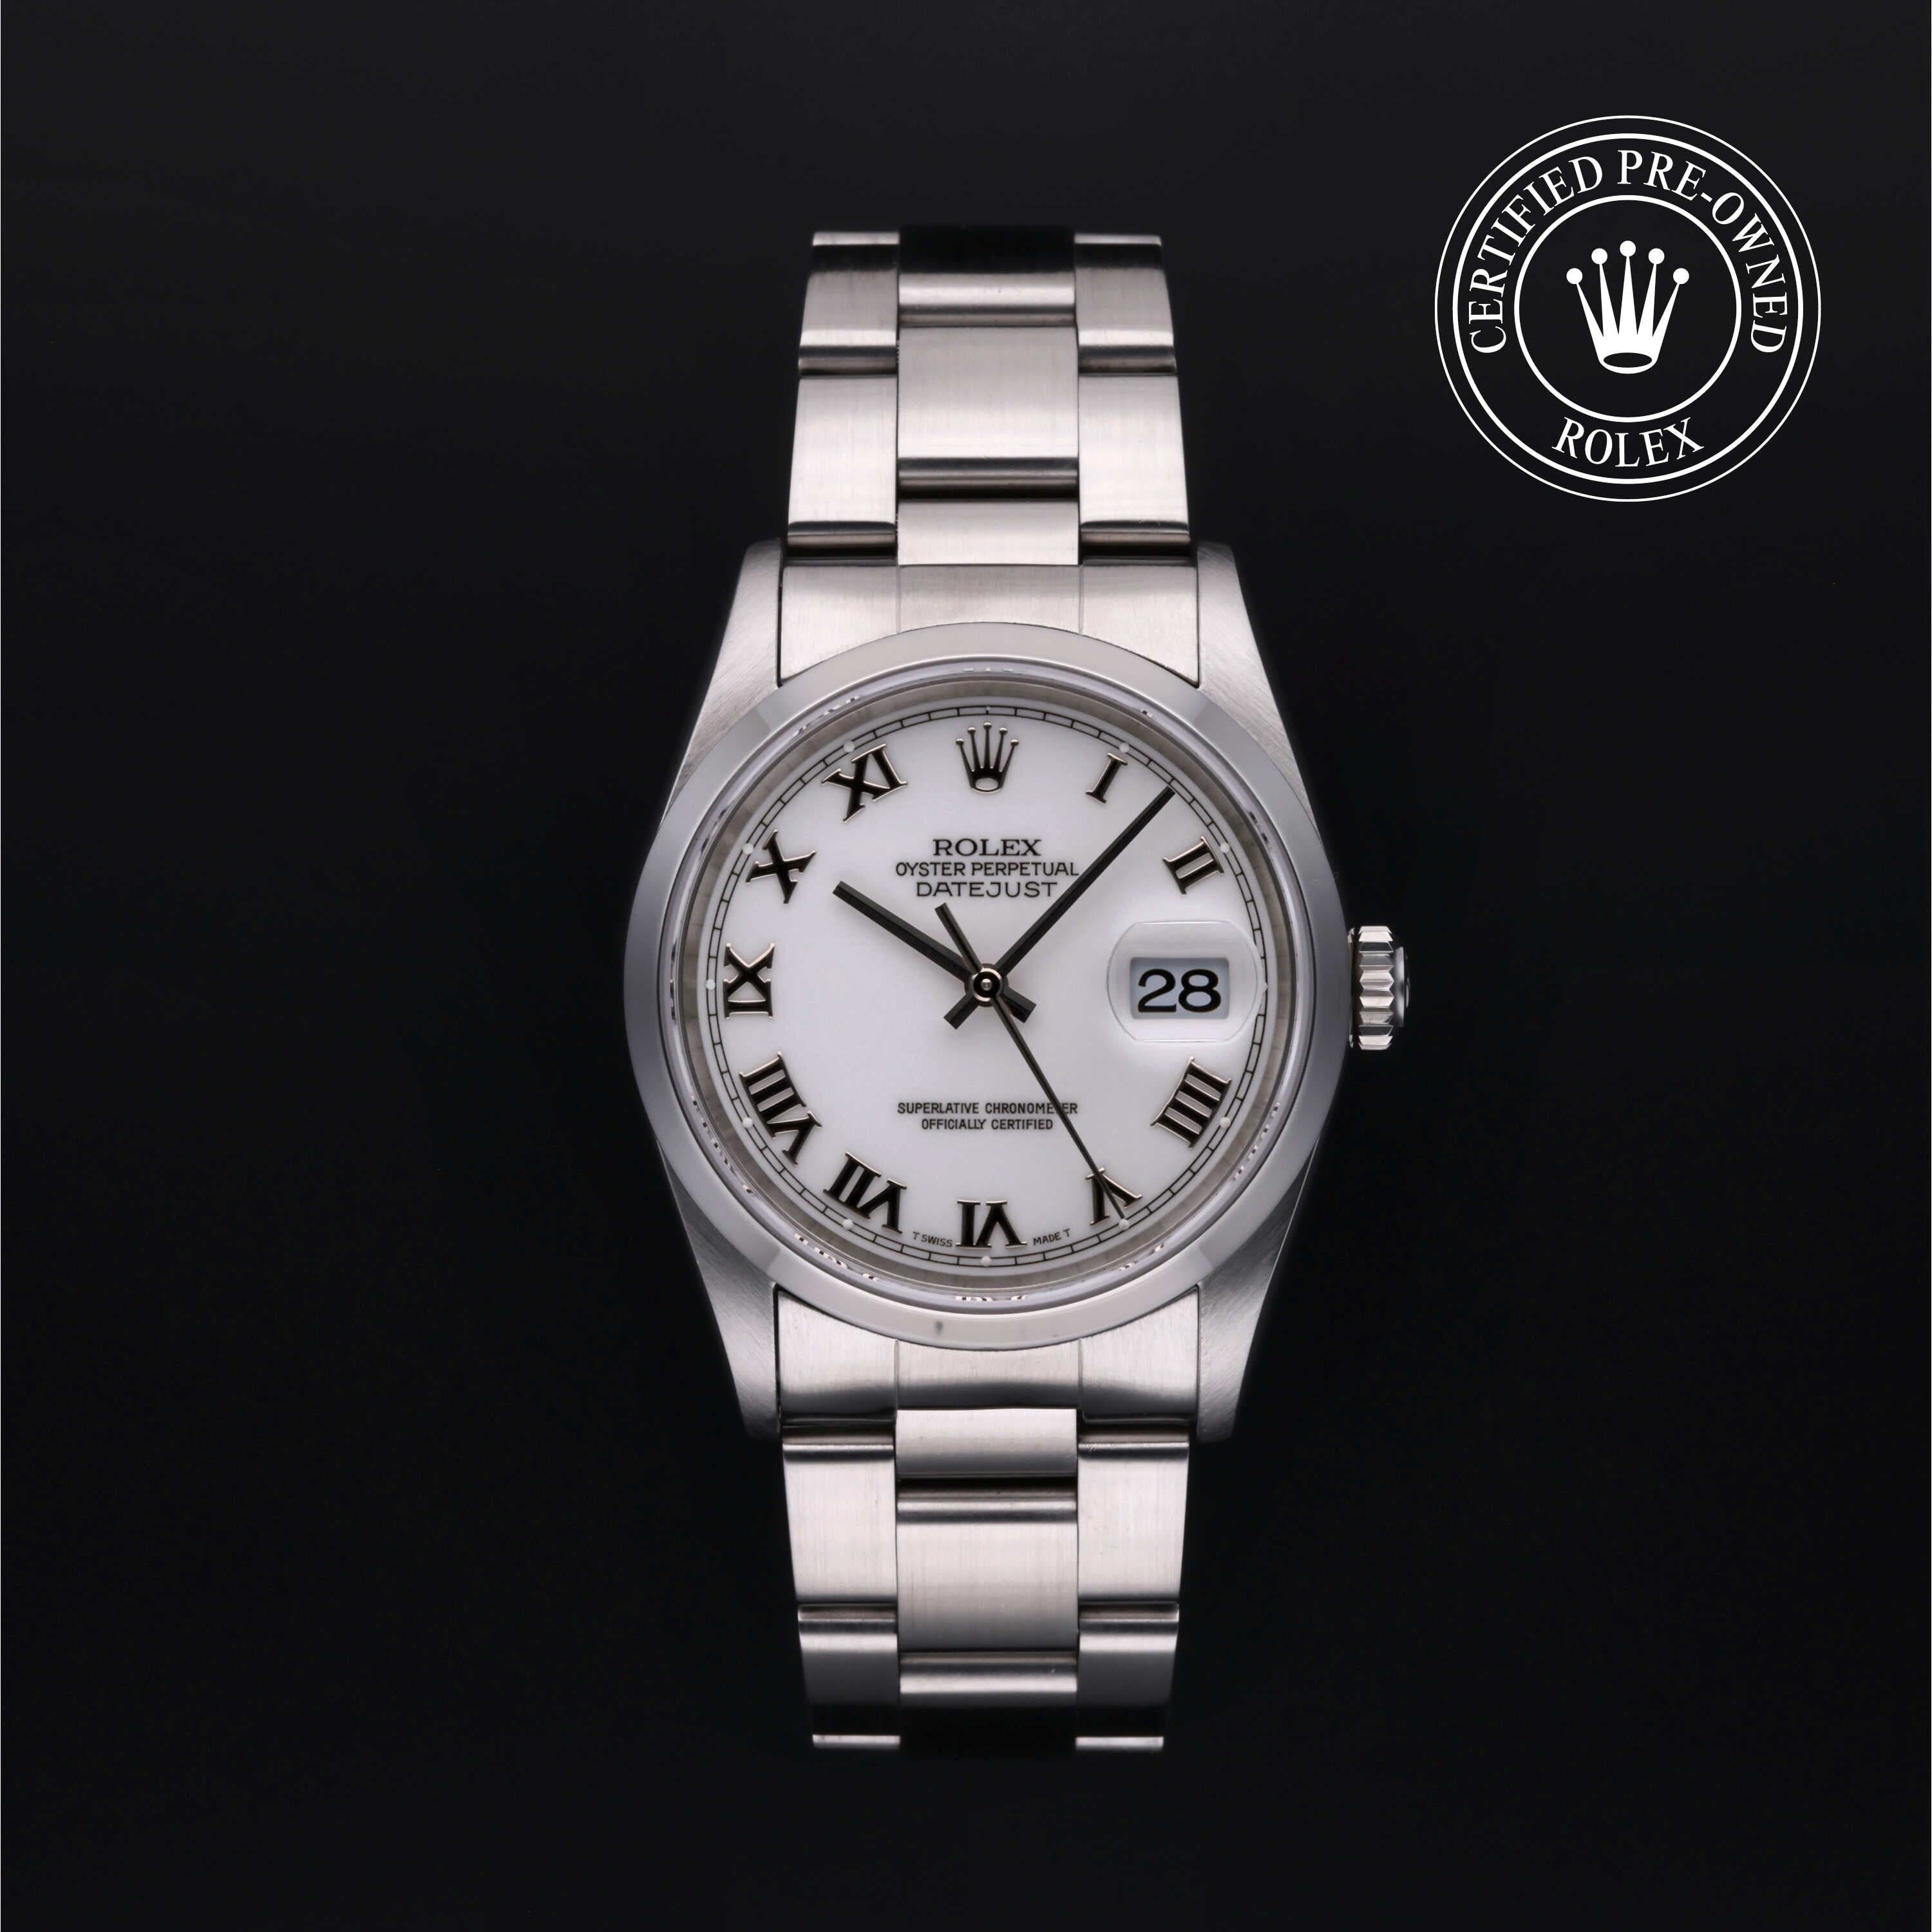 Rolex Certified Pre-Owned Datejust in Oyster, 36 mm, Stainless Steel 16200 watch available at Long's Jewelers.